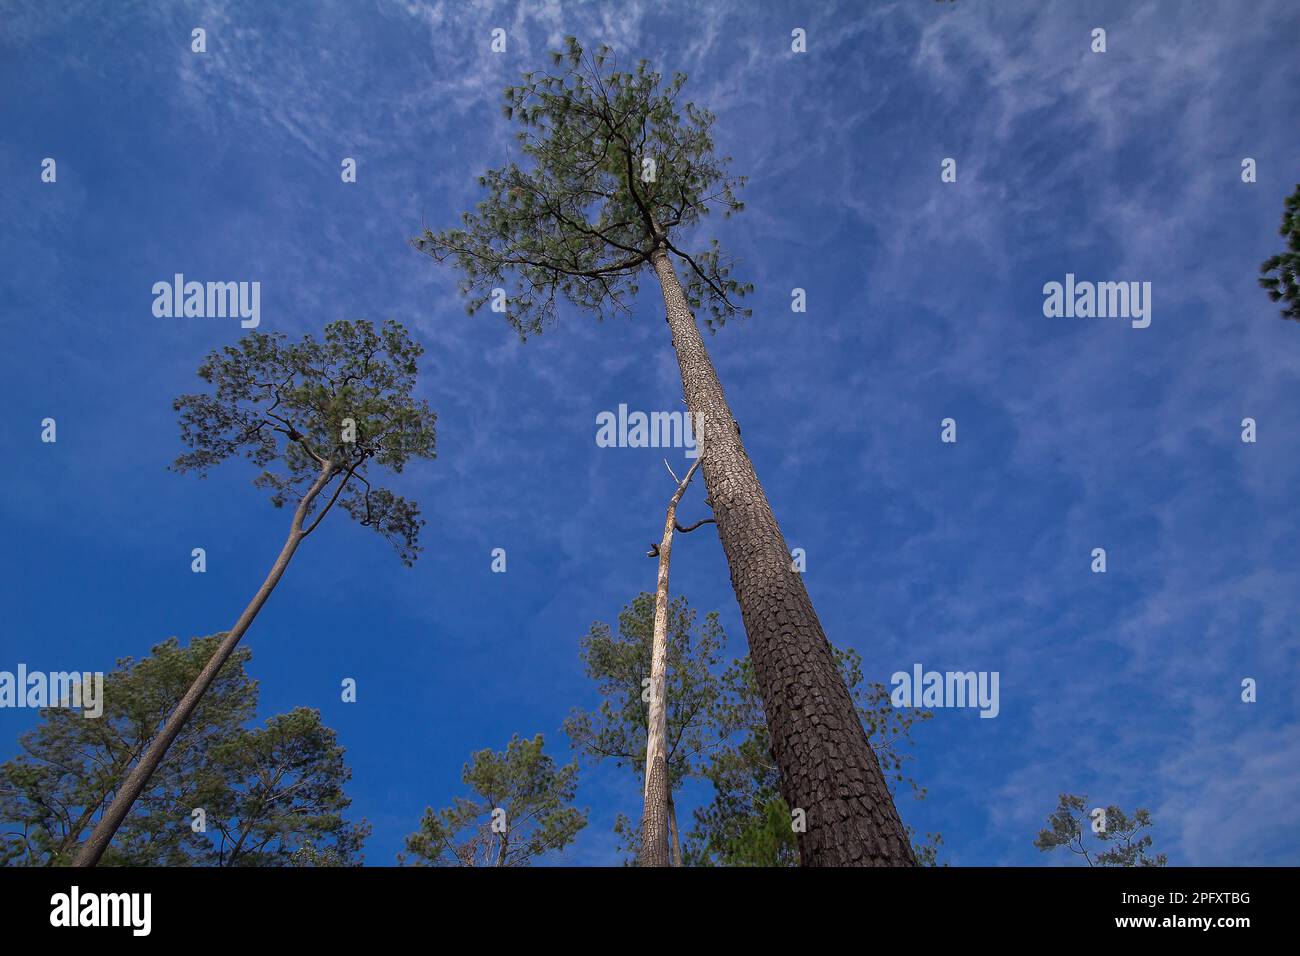 Khasiya Pine on the sky background. Khasiya Pine is a large perennial plant. The trunk is reddish-brown. Flake off Single leaves are clustered. Stock Photo